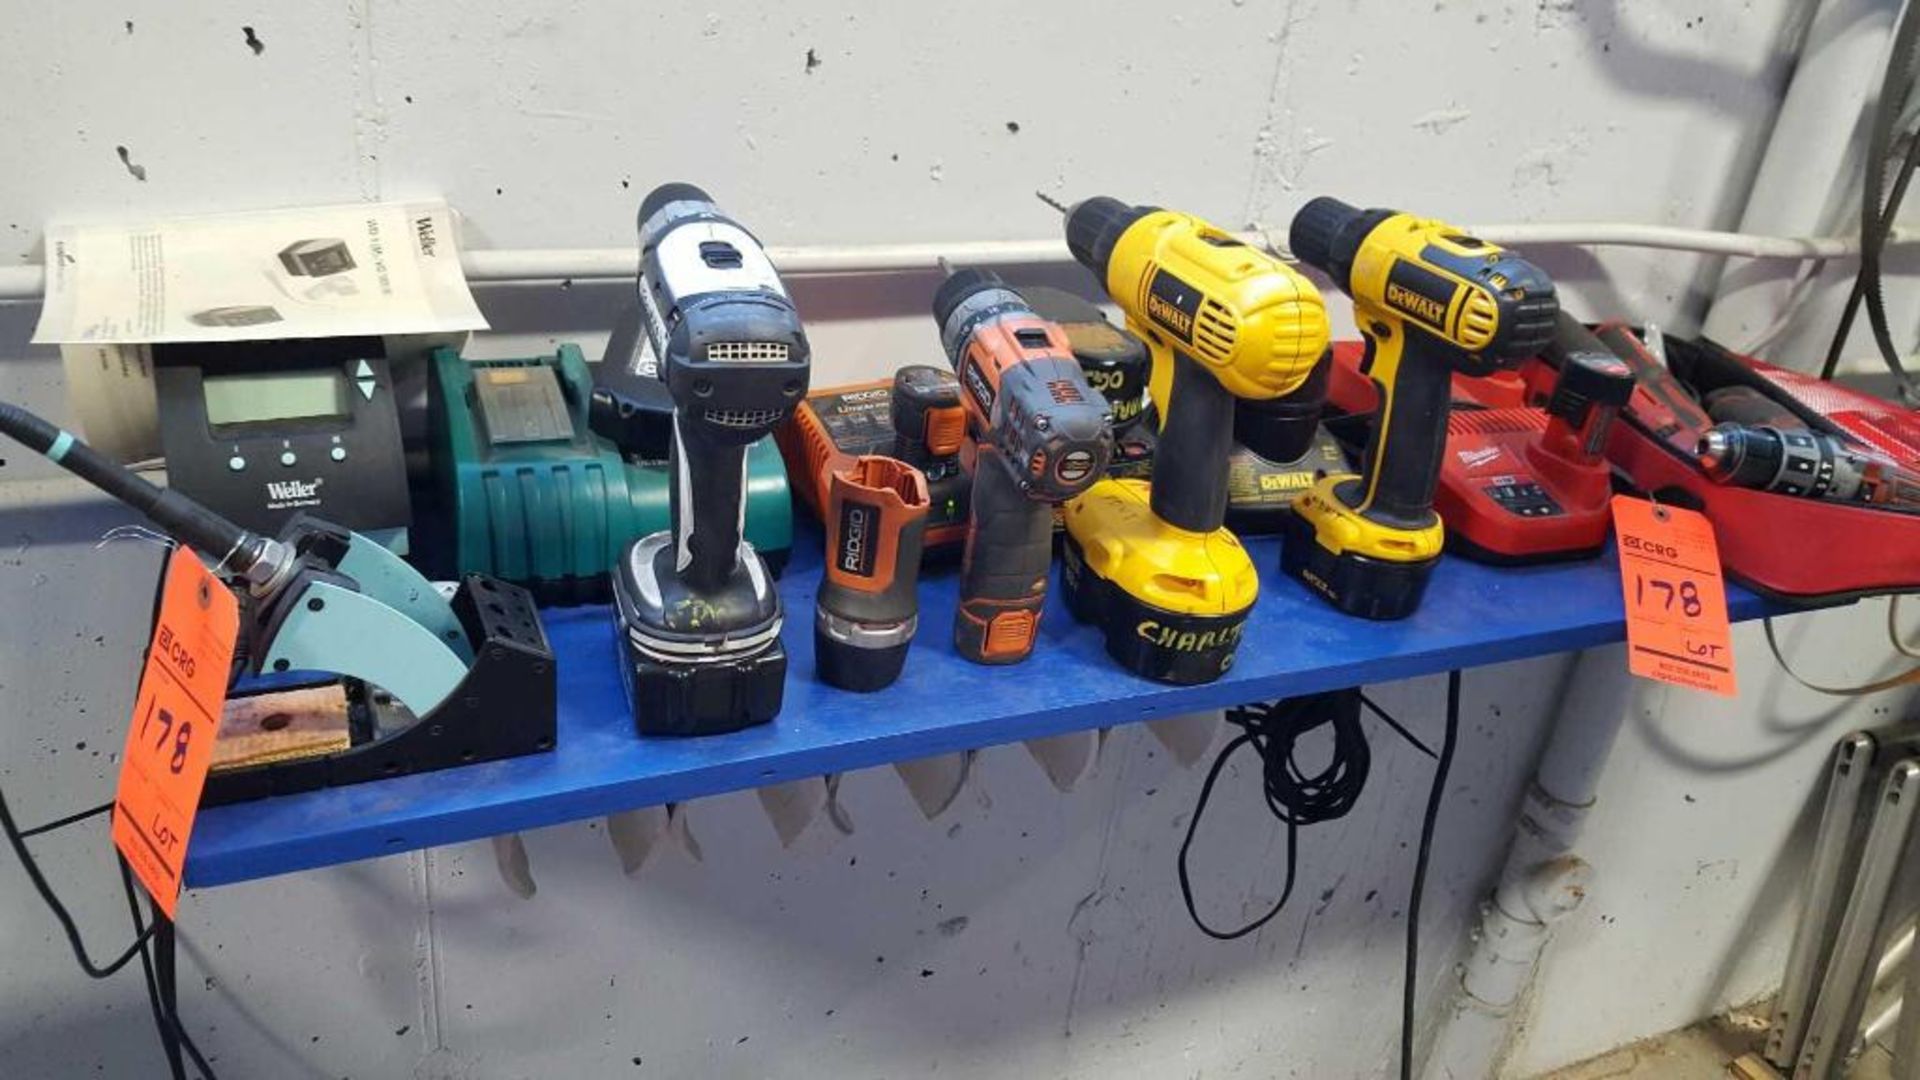 lot of assorted power tools including (5) cordless drills,each with charger and spare battery. Welle